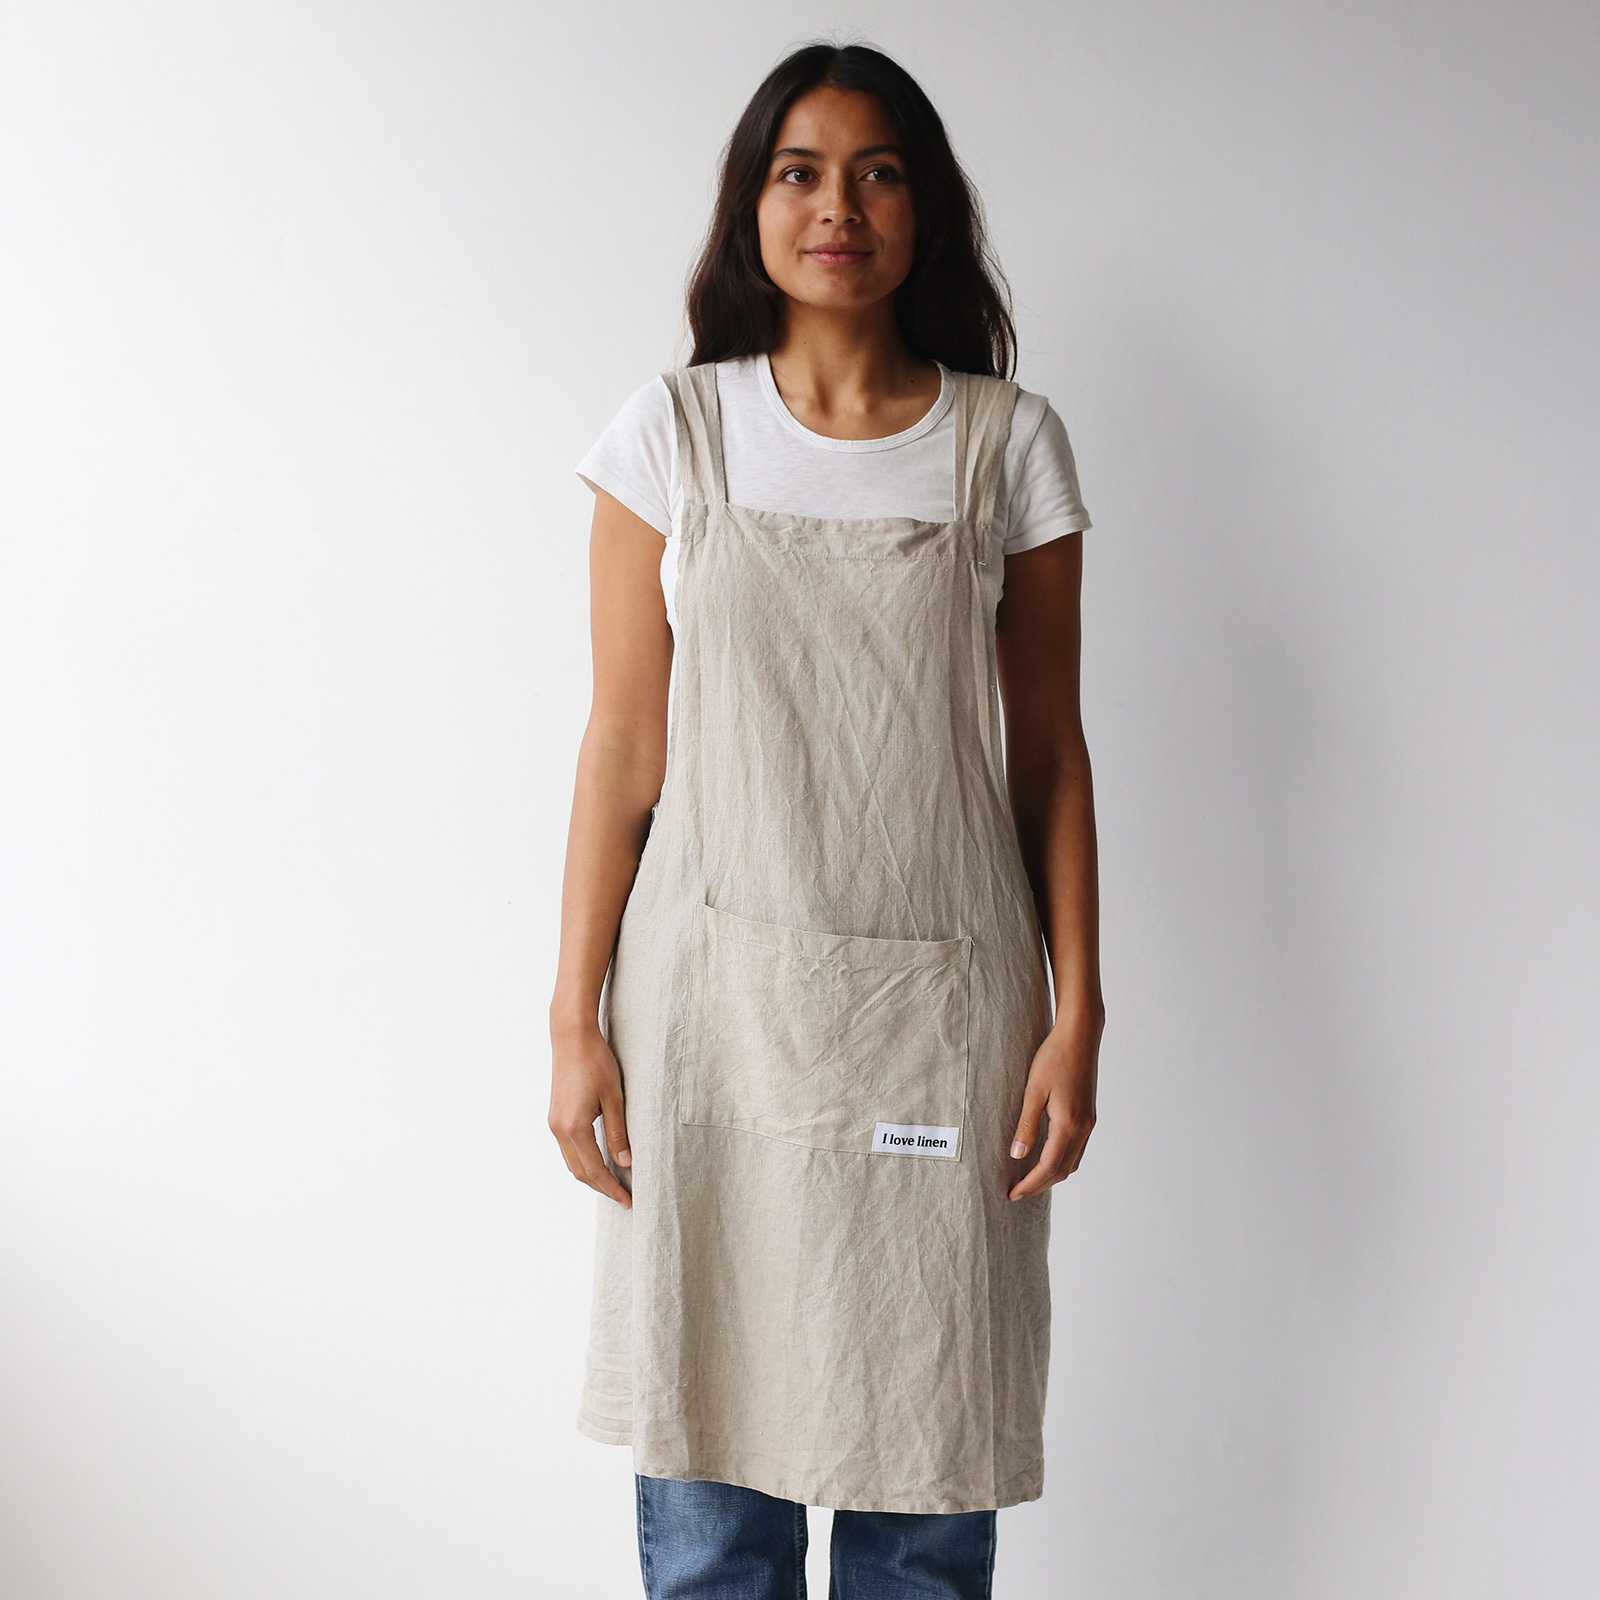 French linen Apron in Natural